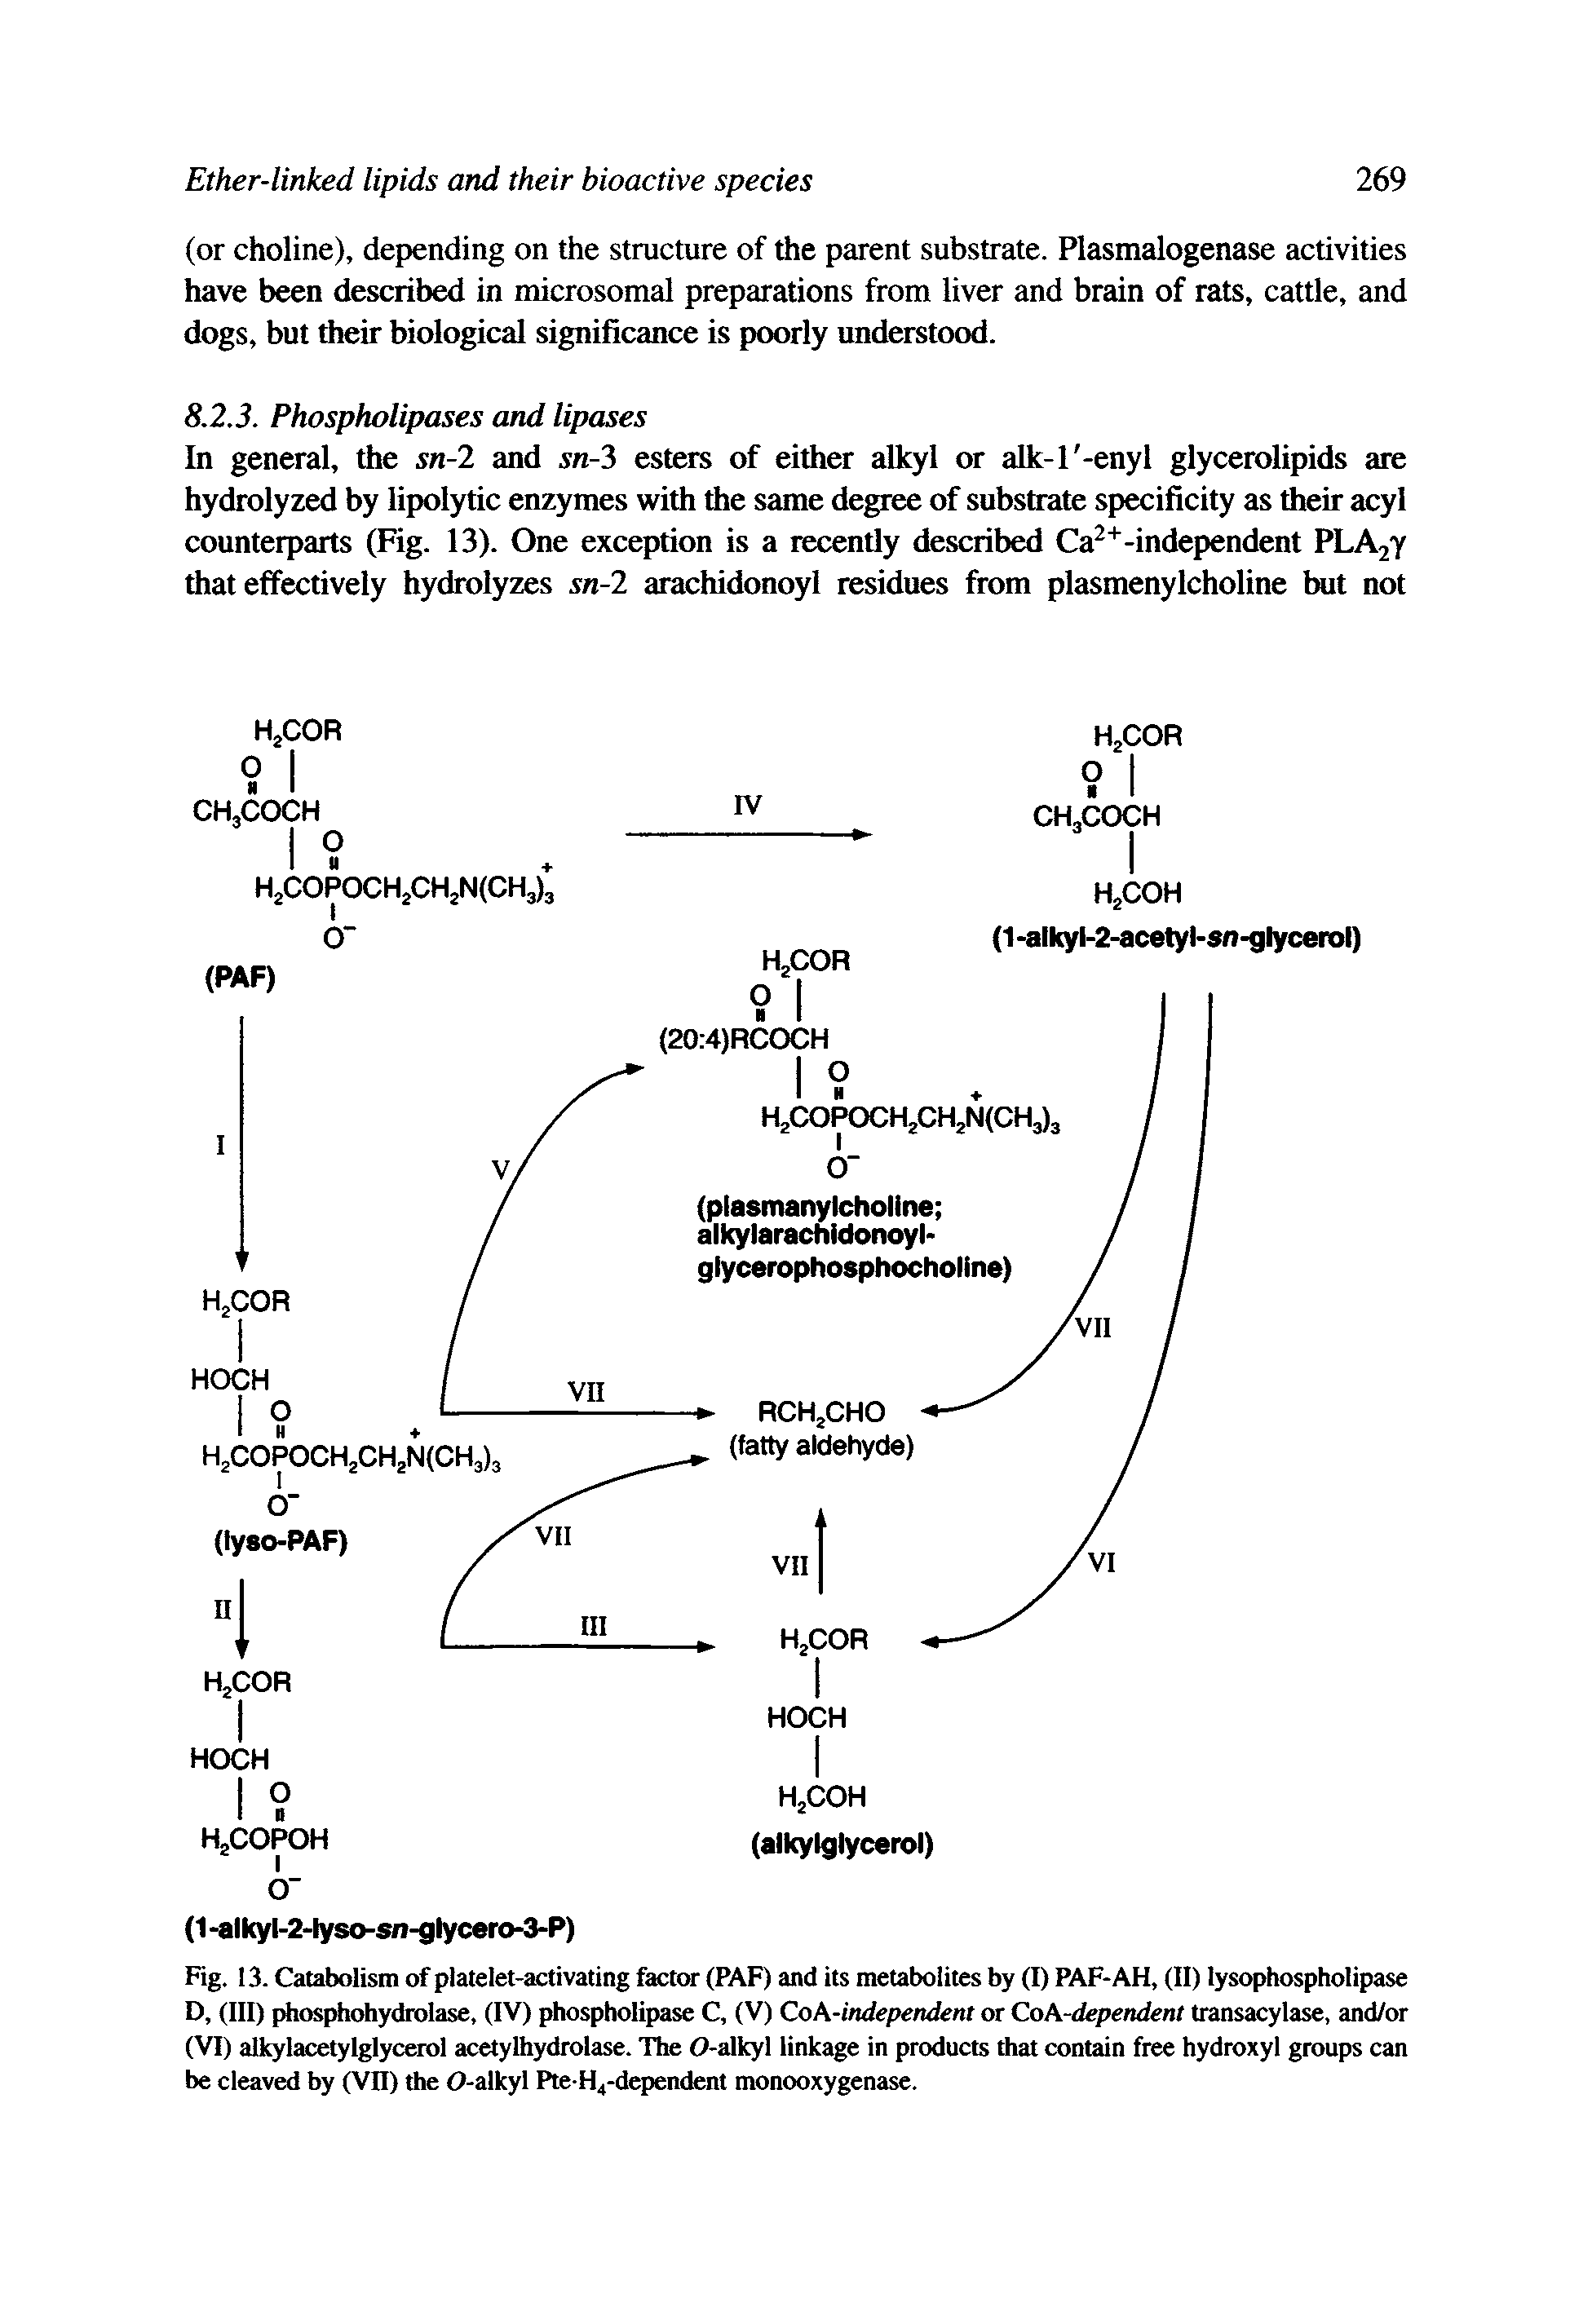 Fig. 13. Catabolism of platelet-activating factor (PAF) and its metabolites by (I) PAF-AH, (II) lysophospholipase D, (III) phosphohydrolase, (IV) phospholipase C, (V) Cok-independent or CoA-dependenI transacylase, and/or (VI) alkylacetylglycerol acetylhydrolase. The O-alkyl linkage in products that contain free hydroxyl groups can be cleaved by (VII) the O-alkyl Pte H4-dependent monooxygenase.